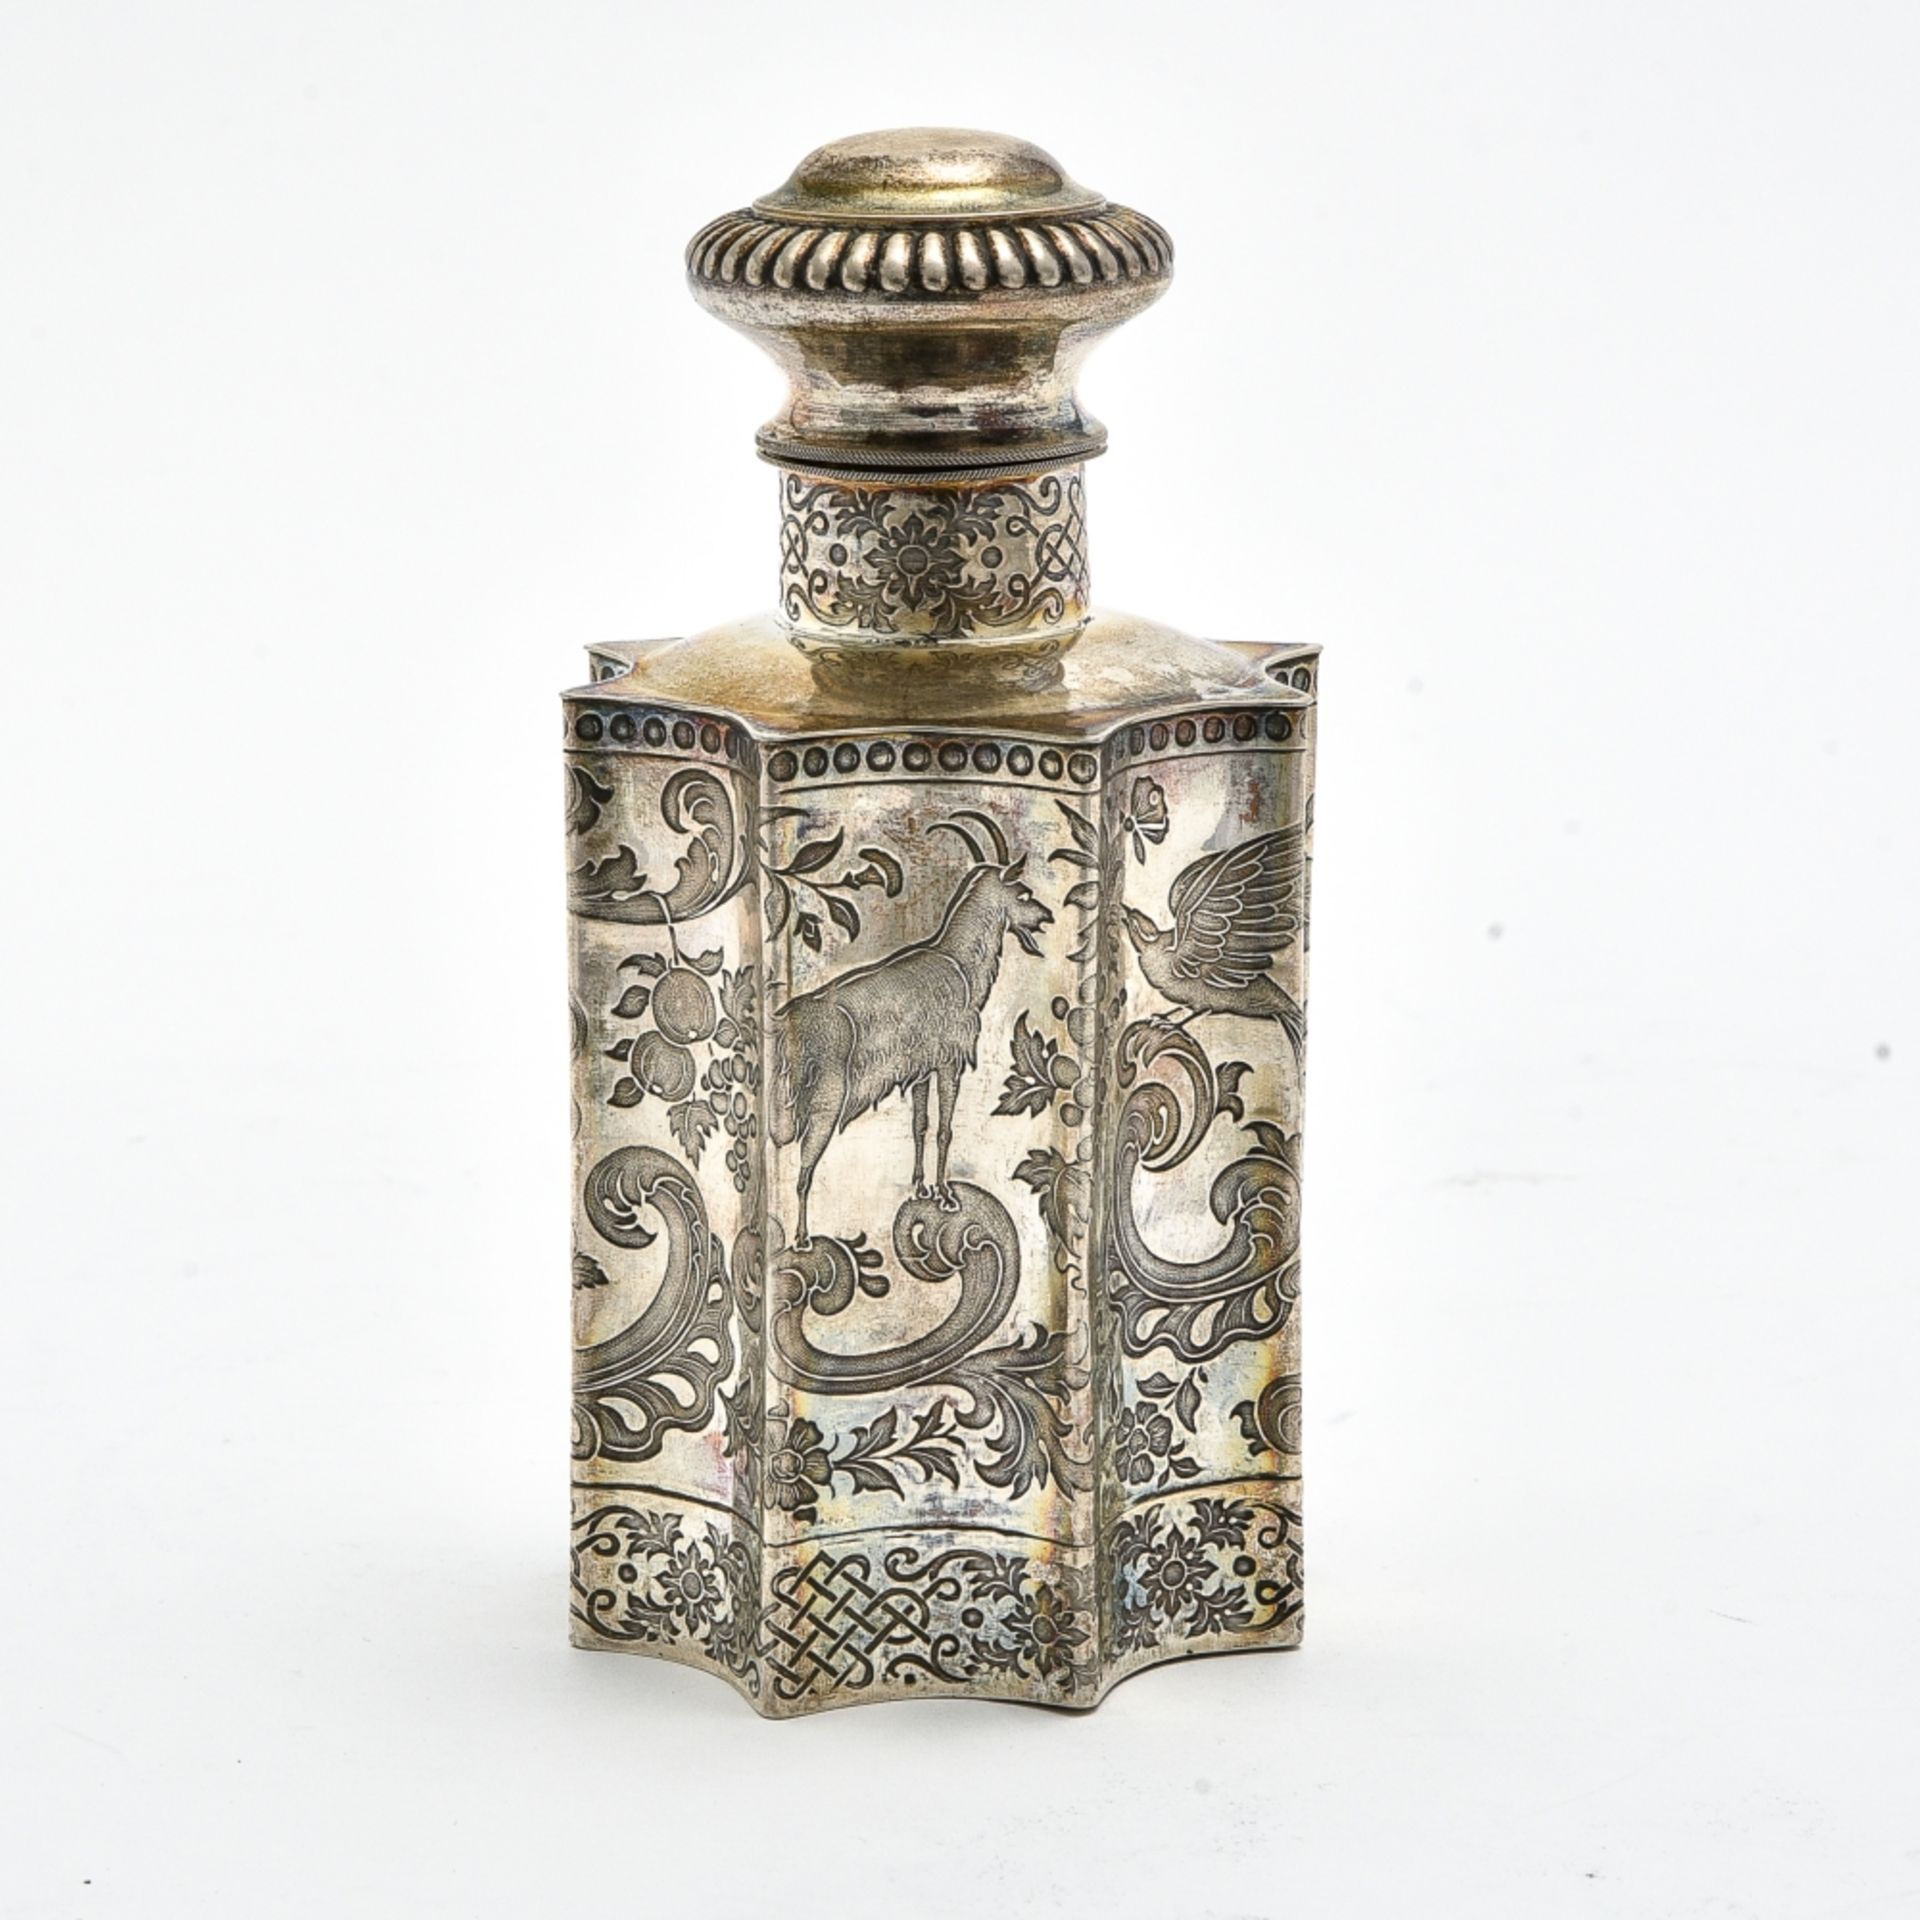 Tea box GERMANY OR AUSTRIA, 19TH CENTURY silver, engraved with a dog, bird, and ibex in a - Image 2 of 2